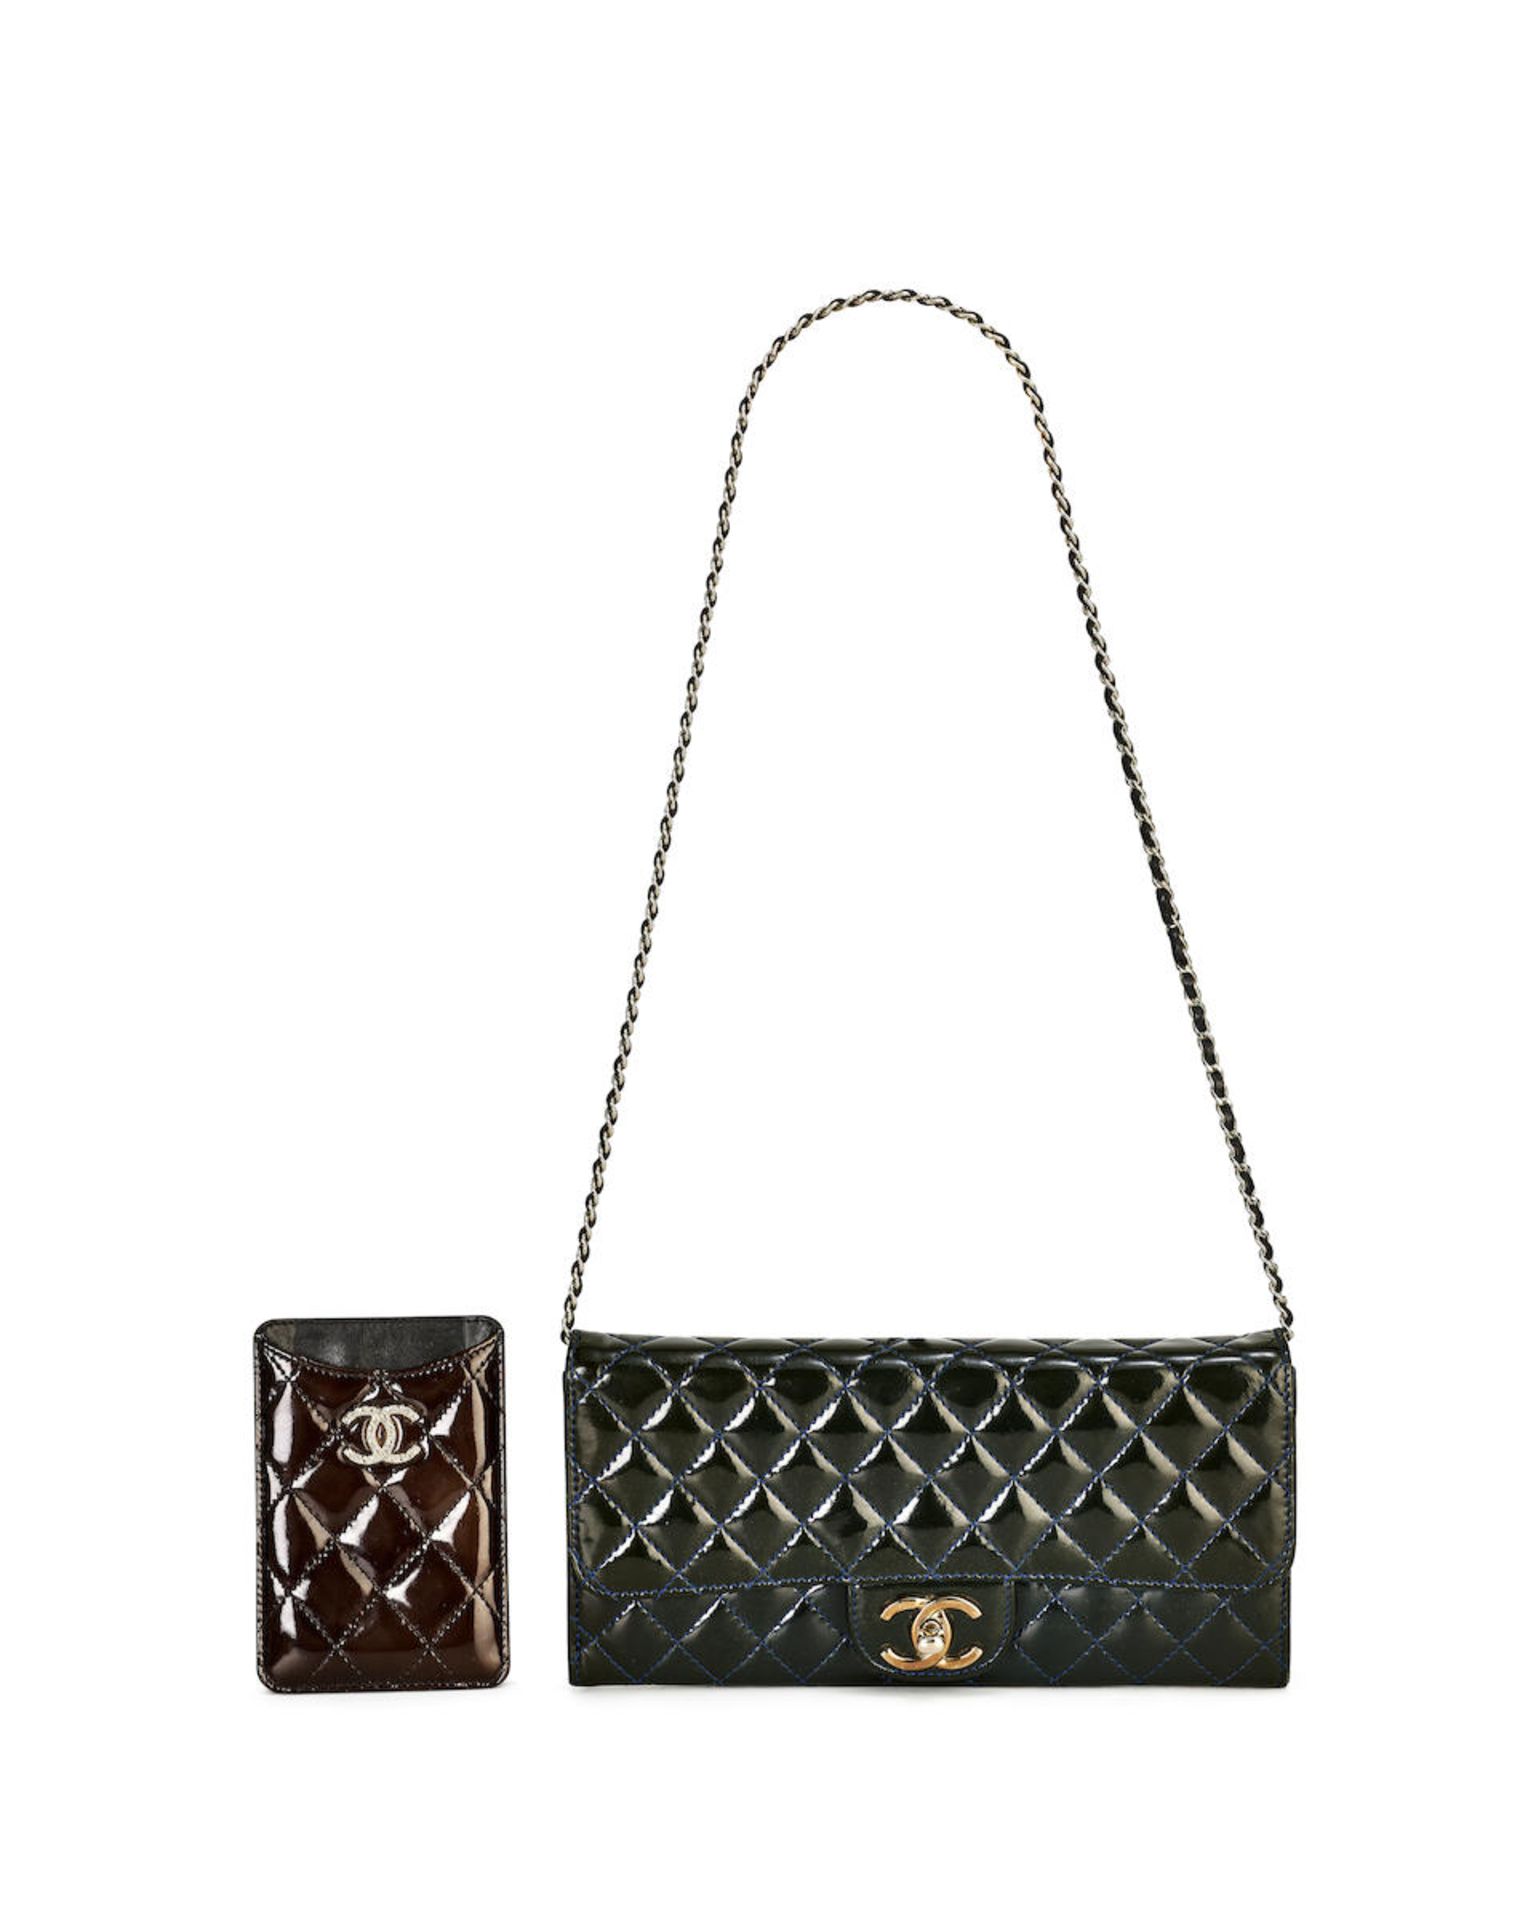 CHANEL: A SET OF 2 BLUE GREY PATENT WALLET ON CHAIN WITH SILVER TONED HARDWARE; MAROON PATENT CA...